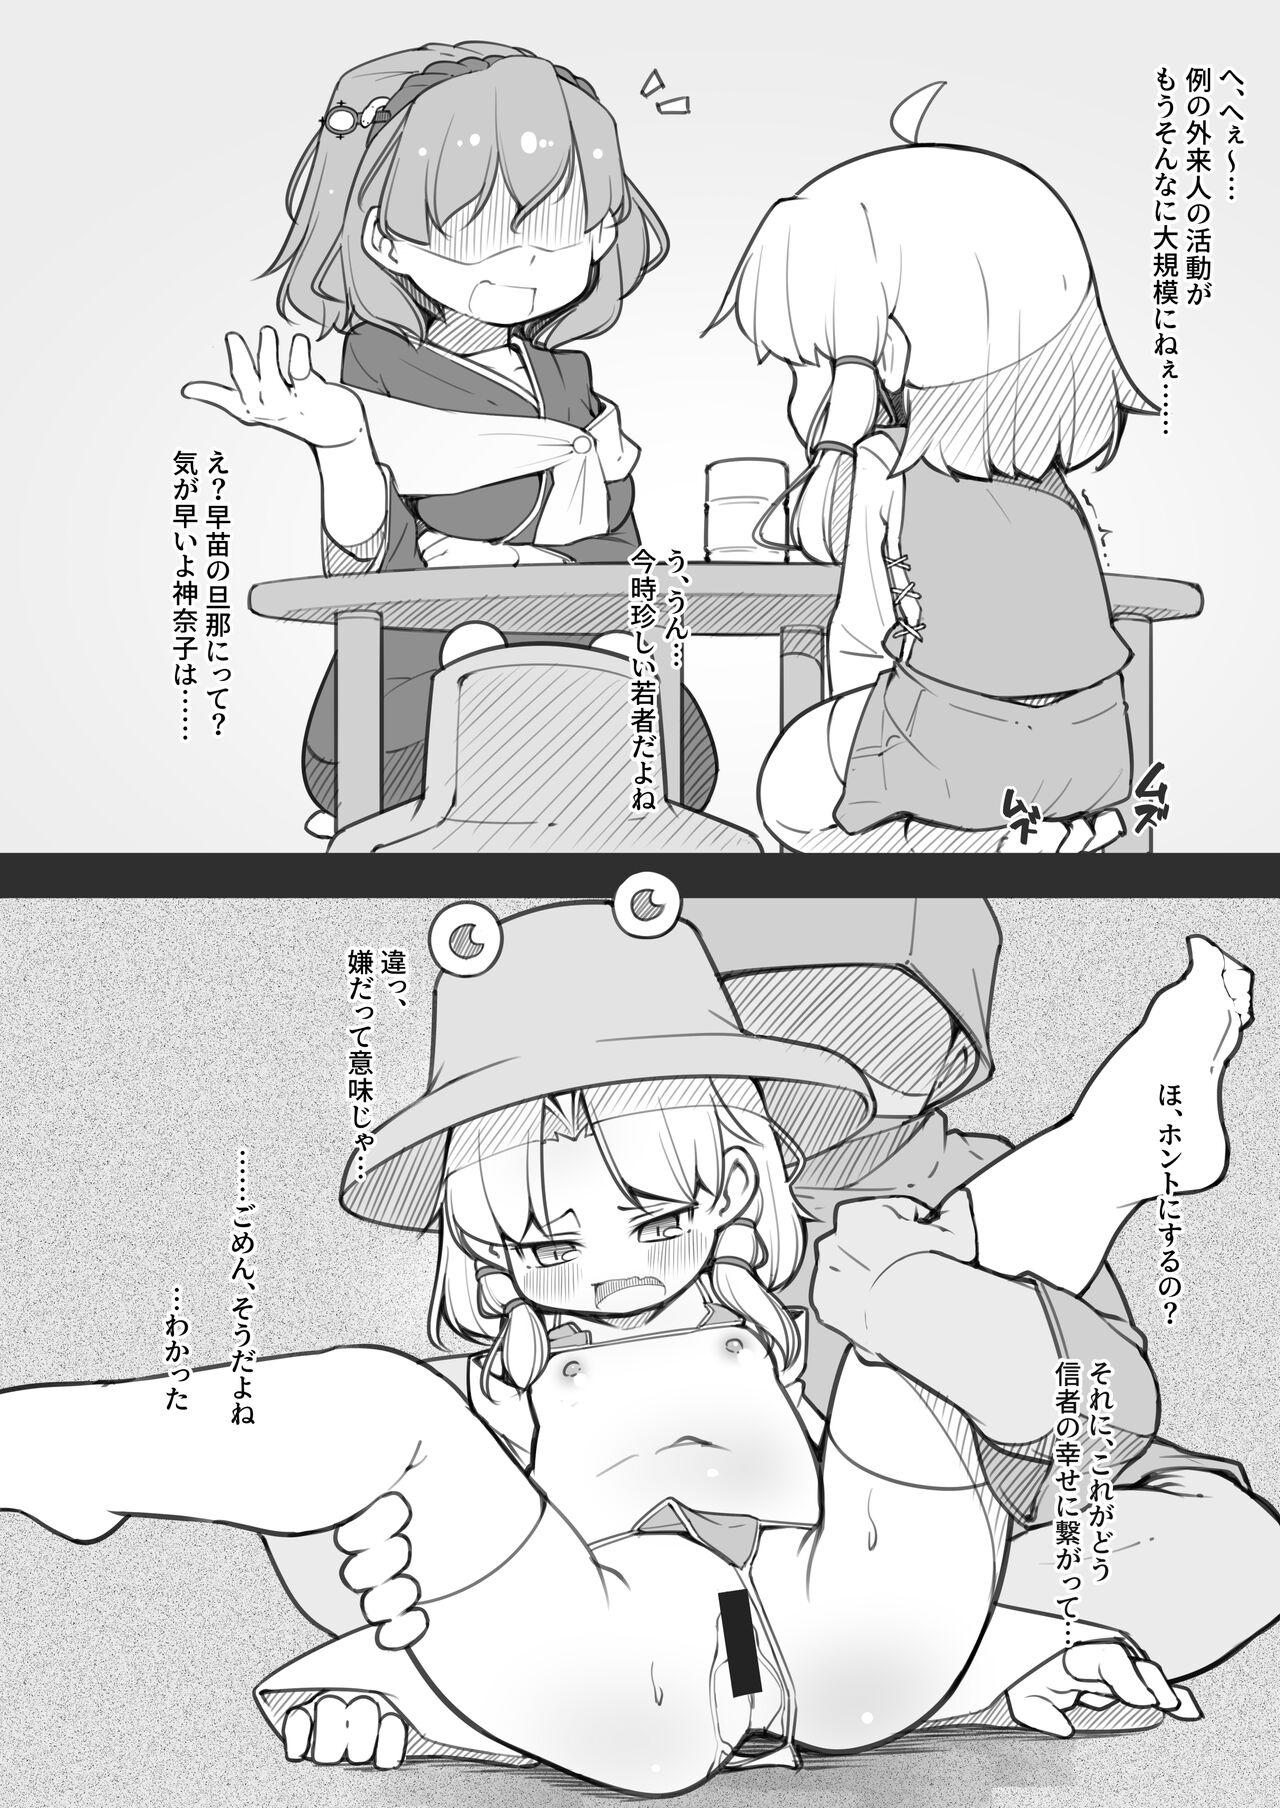 Sloppy 幻想入りしたカリスマ教祖に諏訪子さまが祀り上げられる話 - Touhou project Group - Page 11